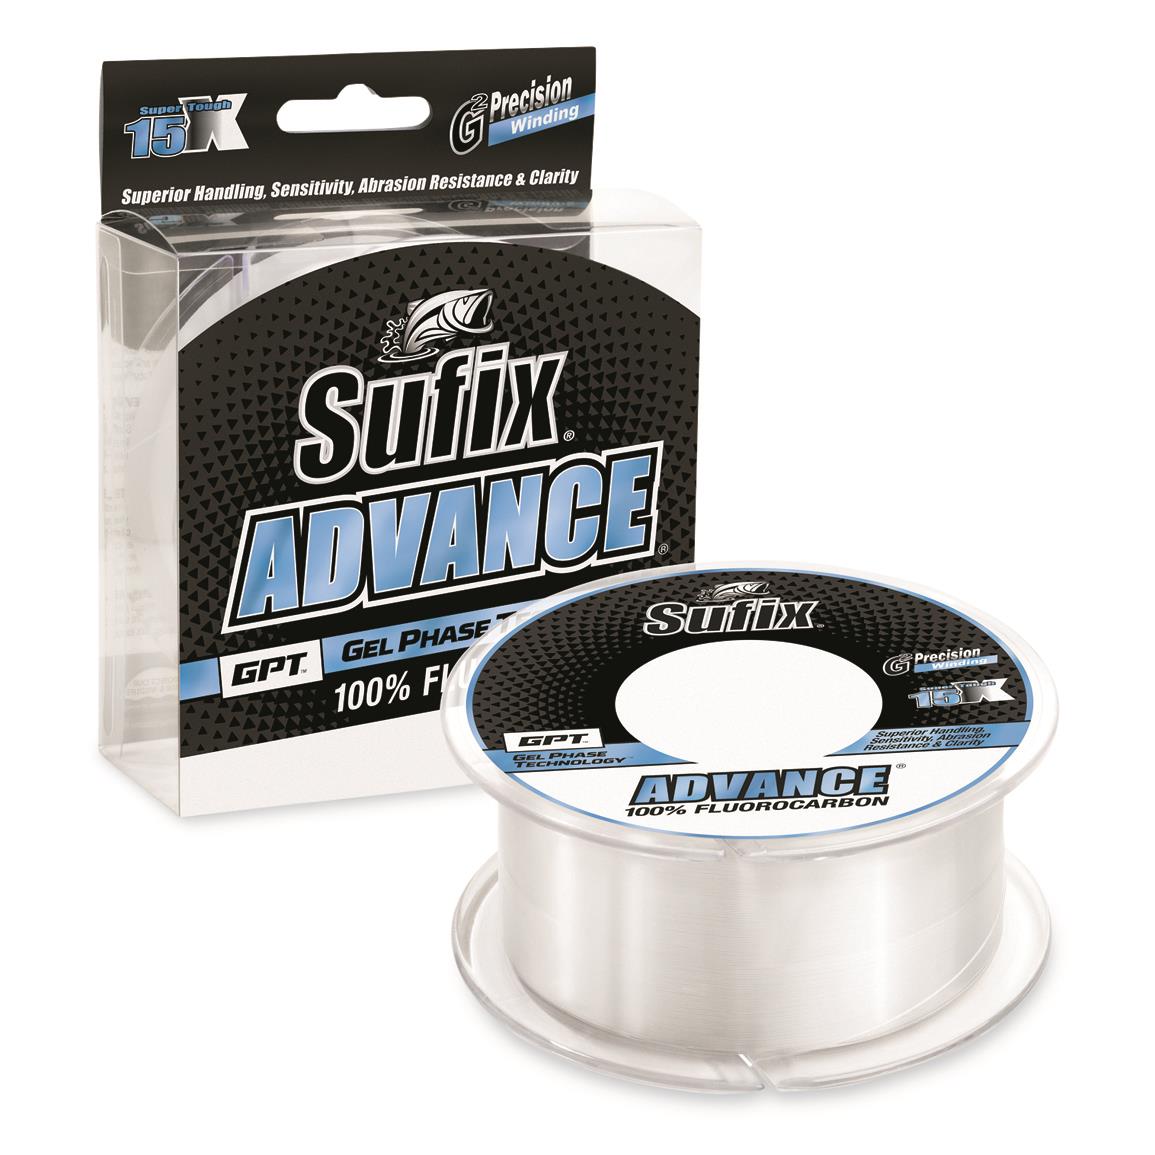 Sufix Advance Fluorocarbon with Gel Phase Technology, 200 Yard Spool, Clear